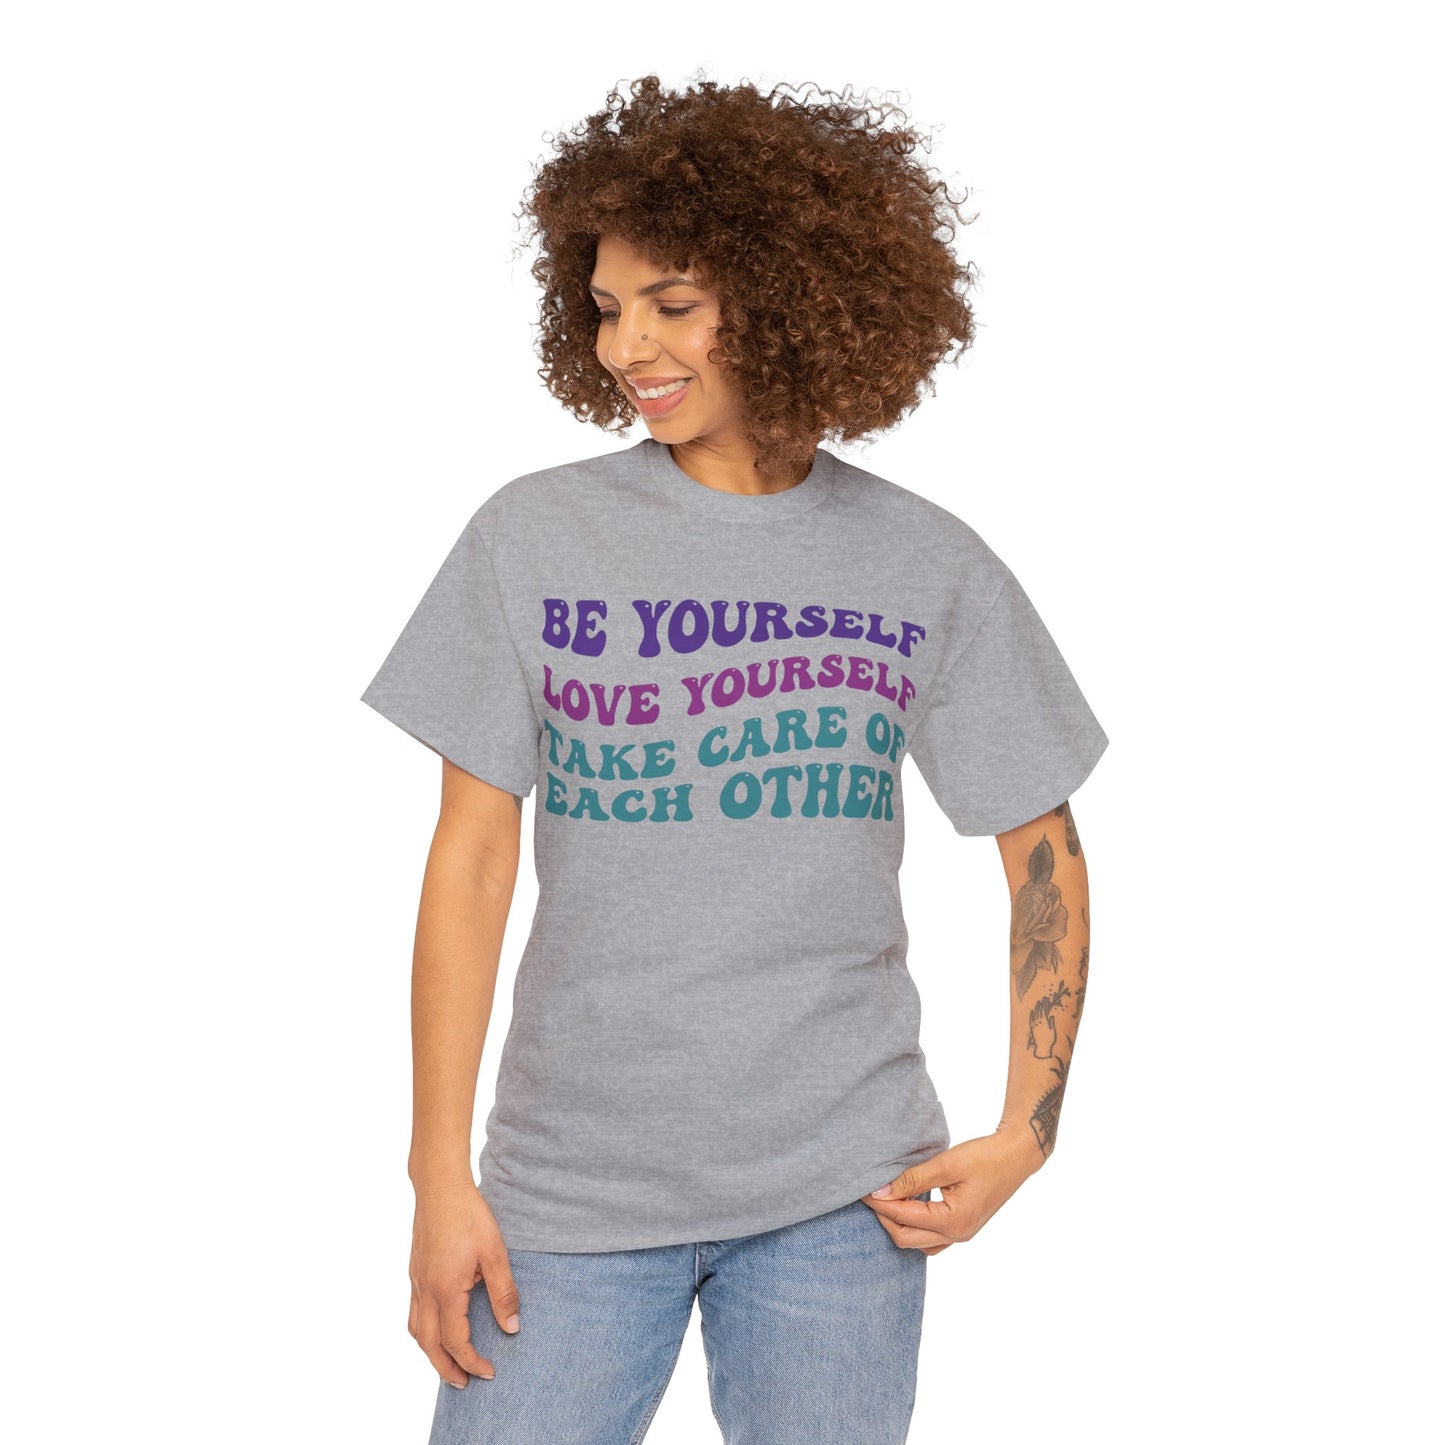 Be Yourself, Love Yourself, Take Care of Each Other T-Shirt, Funky Retro Tee, Gift for Nice People